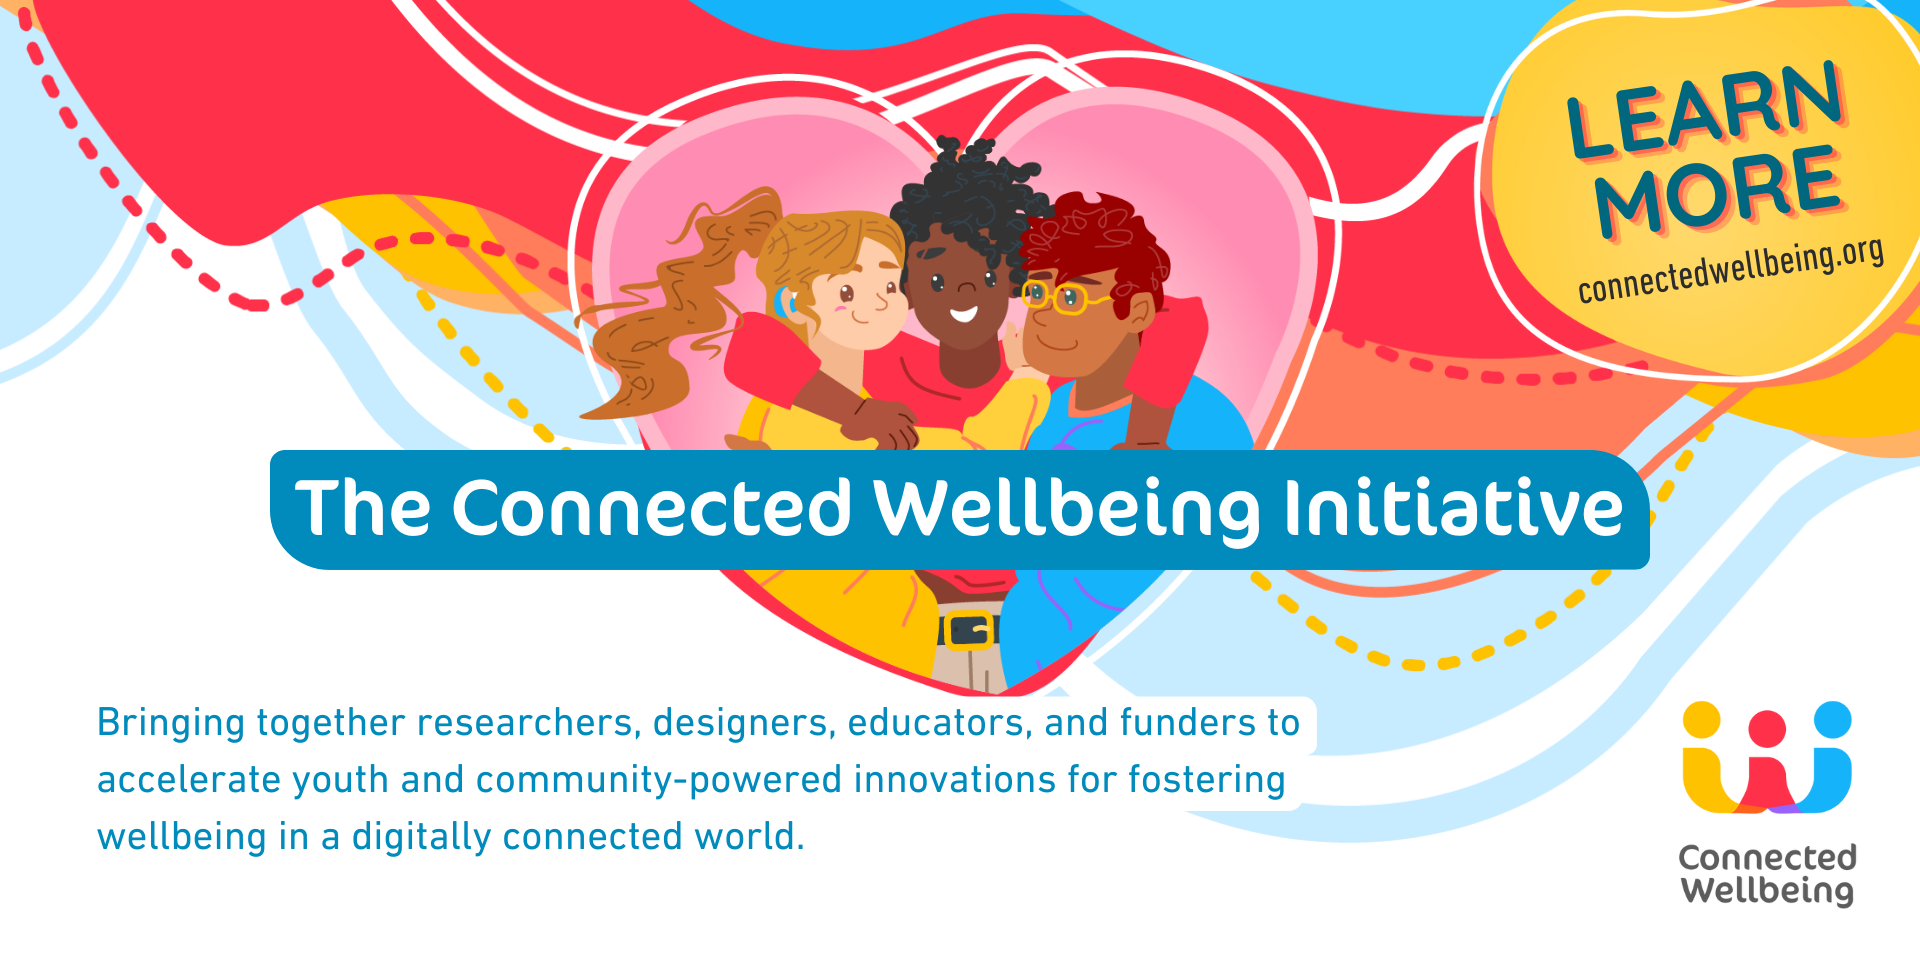 The Connected Wellbeing Initiative: Bringing together researchers, designers, educators, and funders to accelerate youth- and community-powered innovations for fostering wellbeing in a digitally connected world. Learn more: connectedwellbeing.org.